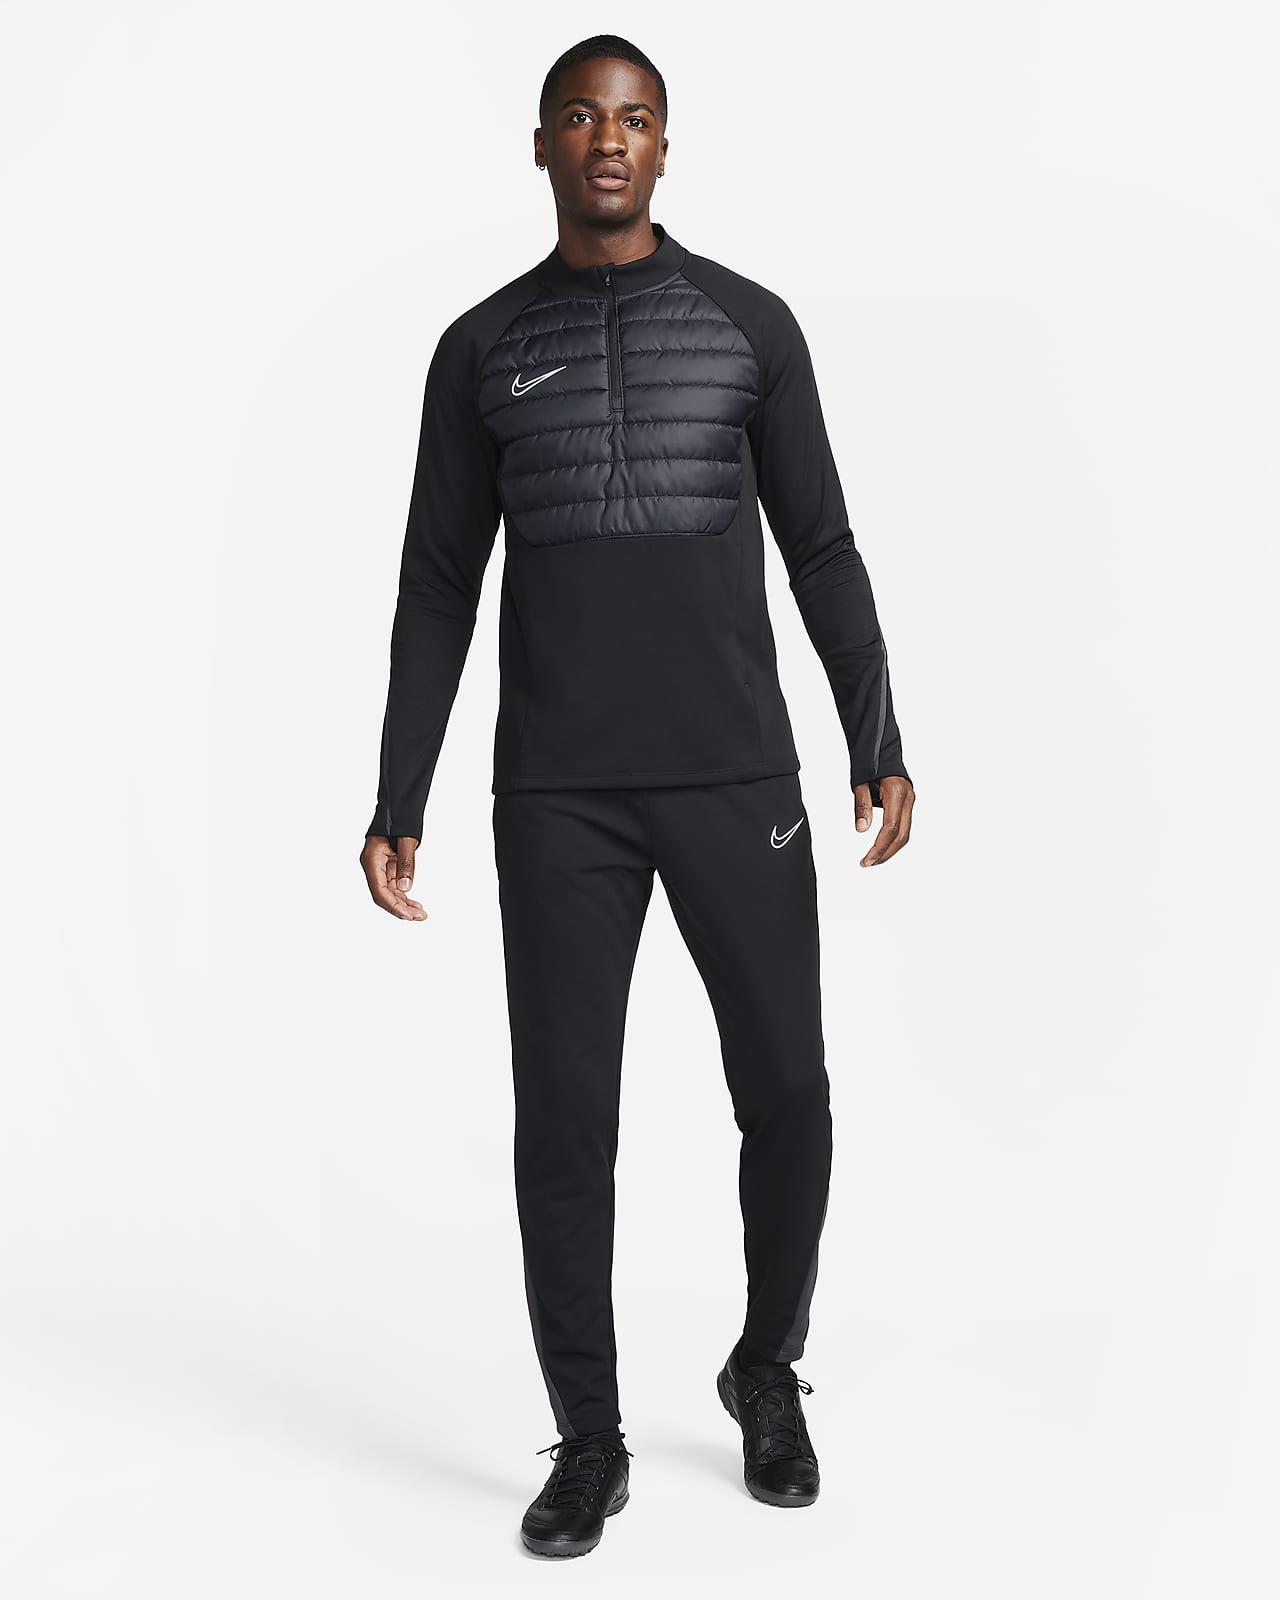 Nike Dri-Fit Thermal Running Hat and Glove Set Black/Anthracite